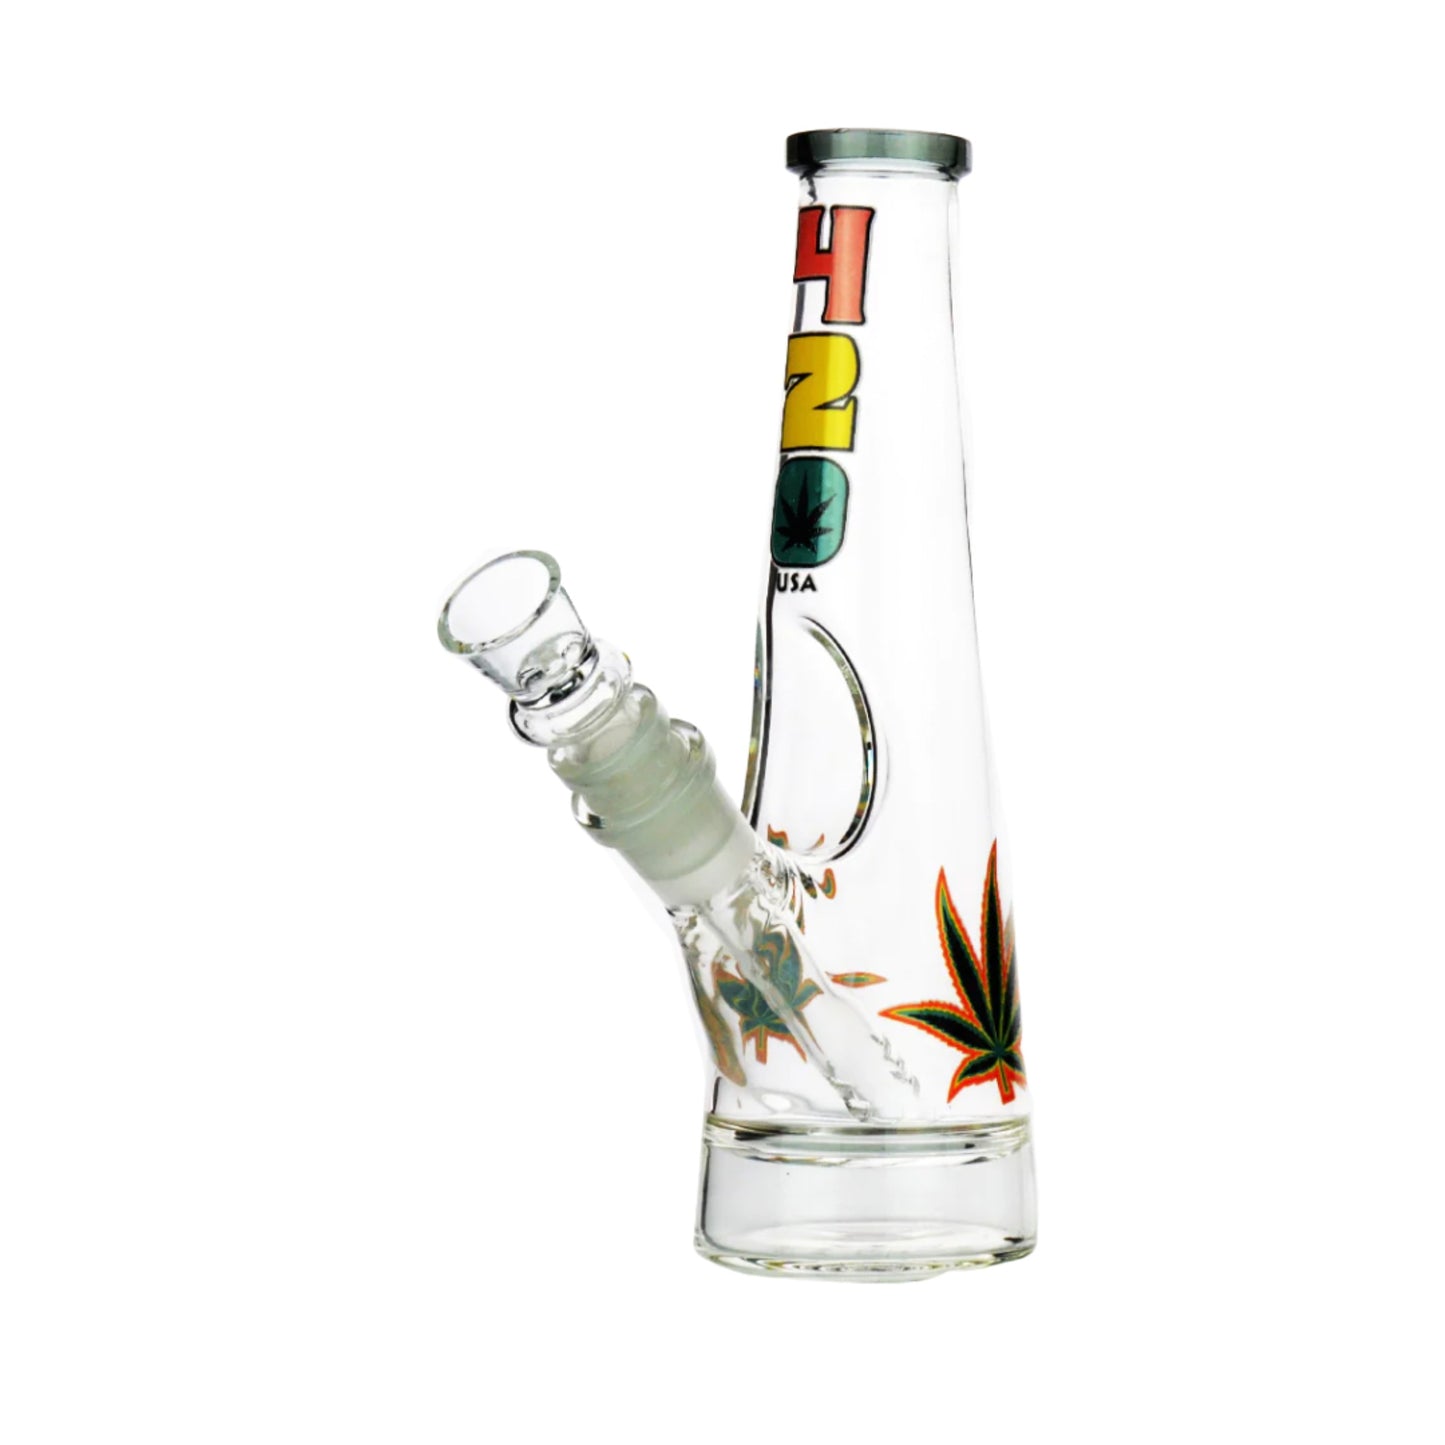 8" 420 Glass Bong with Ice Catcher